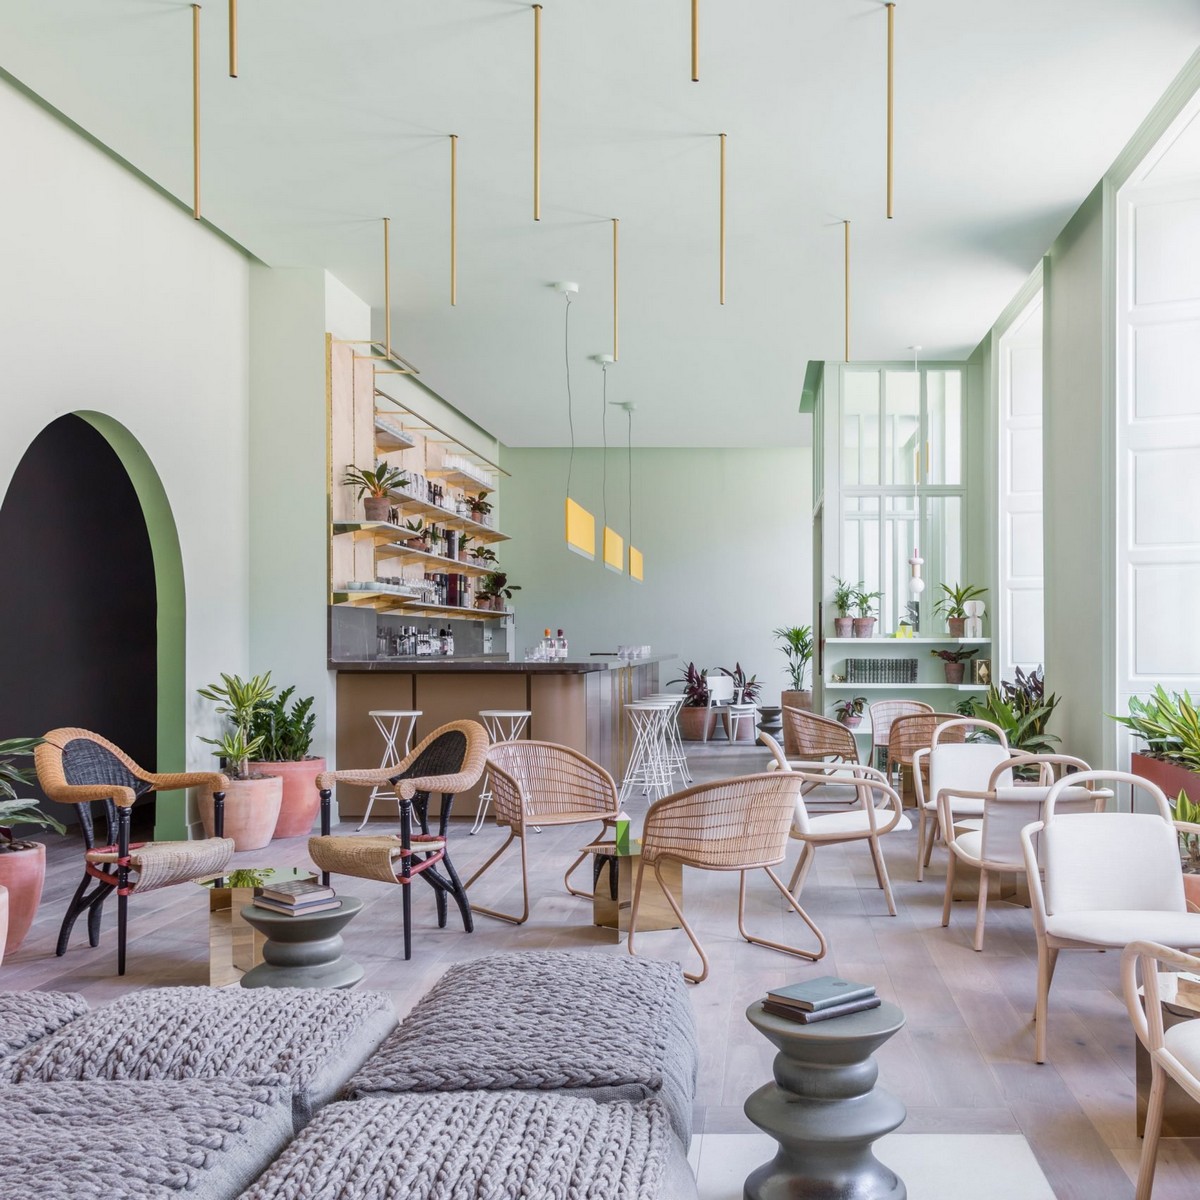 Top 10 Best Hotels of 2017: A Dezeen Selection | Thinking about next years vacation? We show you some awesome locations. #tophotels #hoteldesign #besthotels #luxuryhotels #traveldestinations #centertables